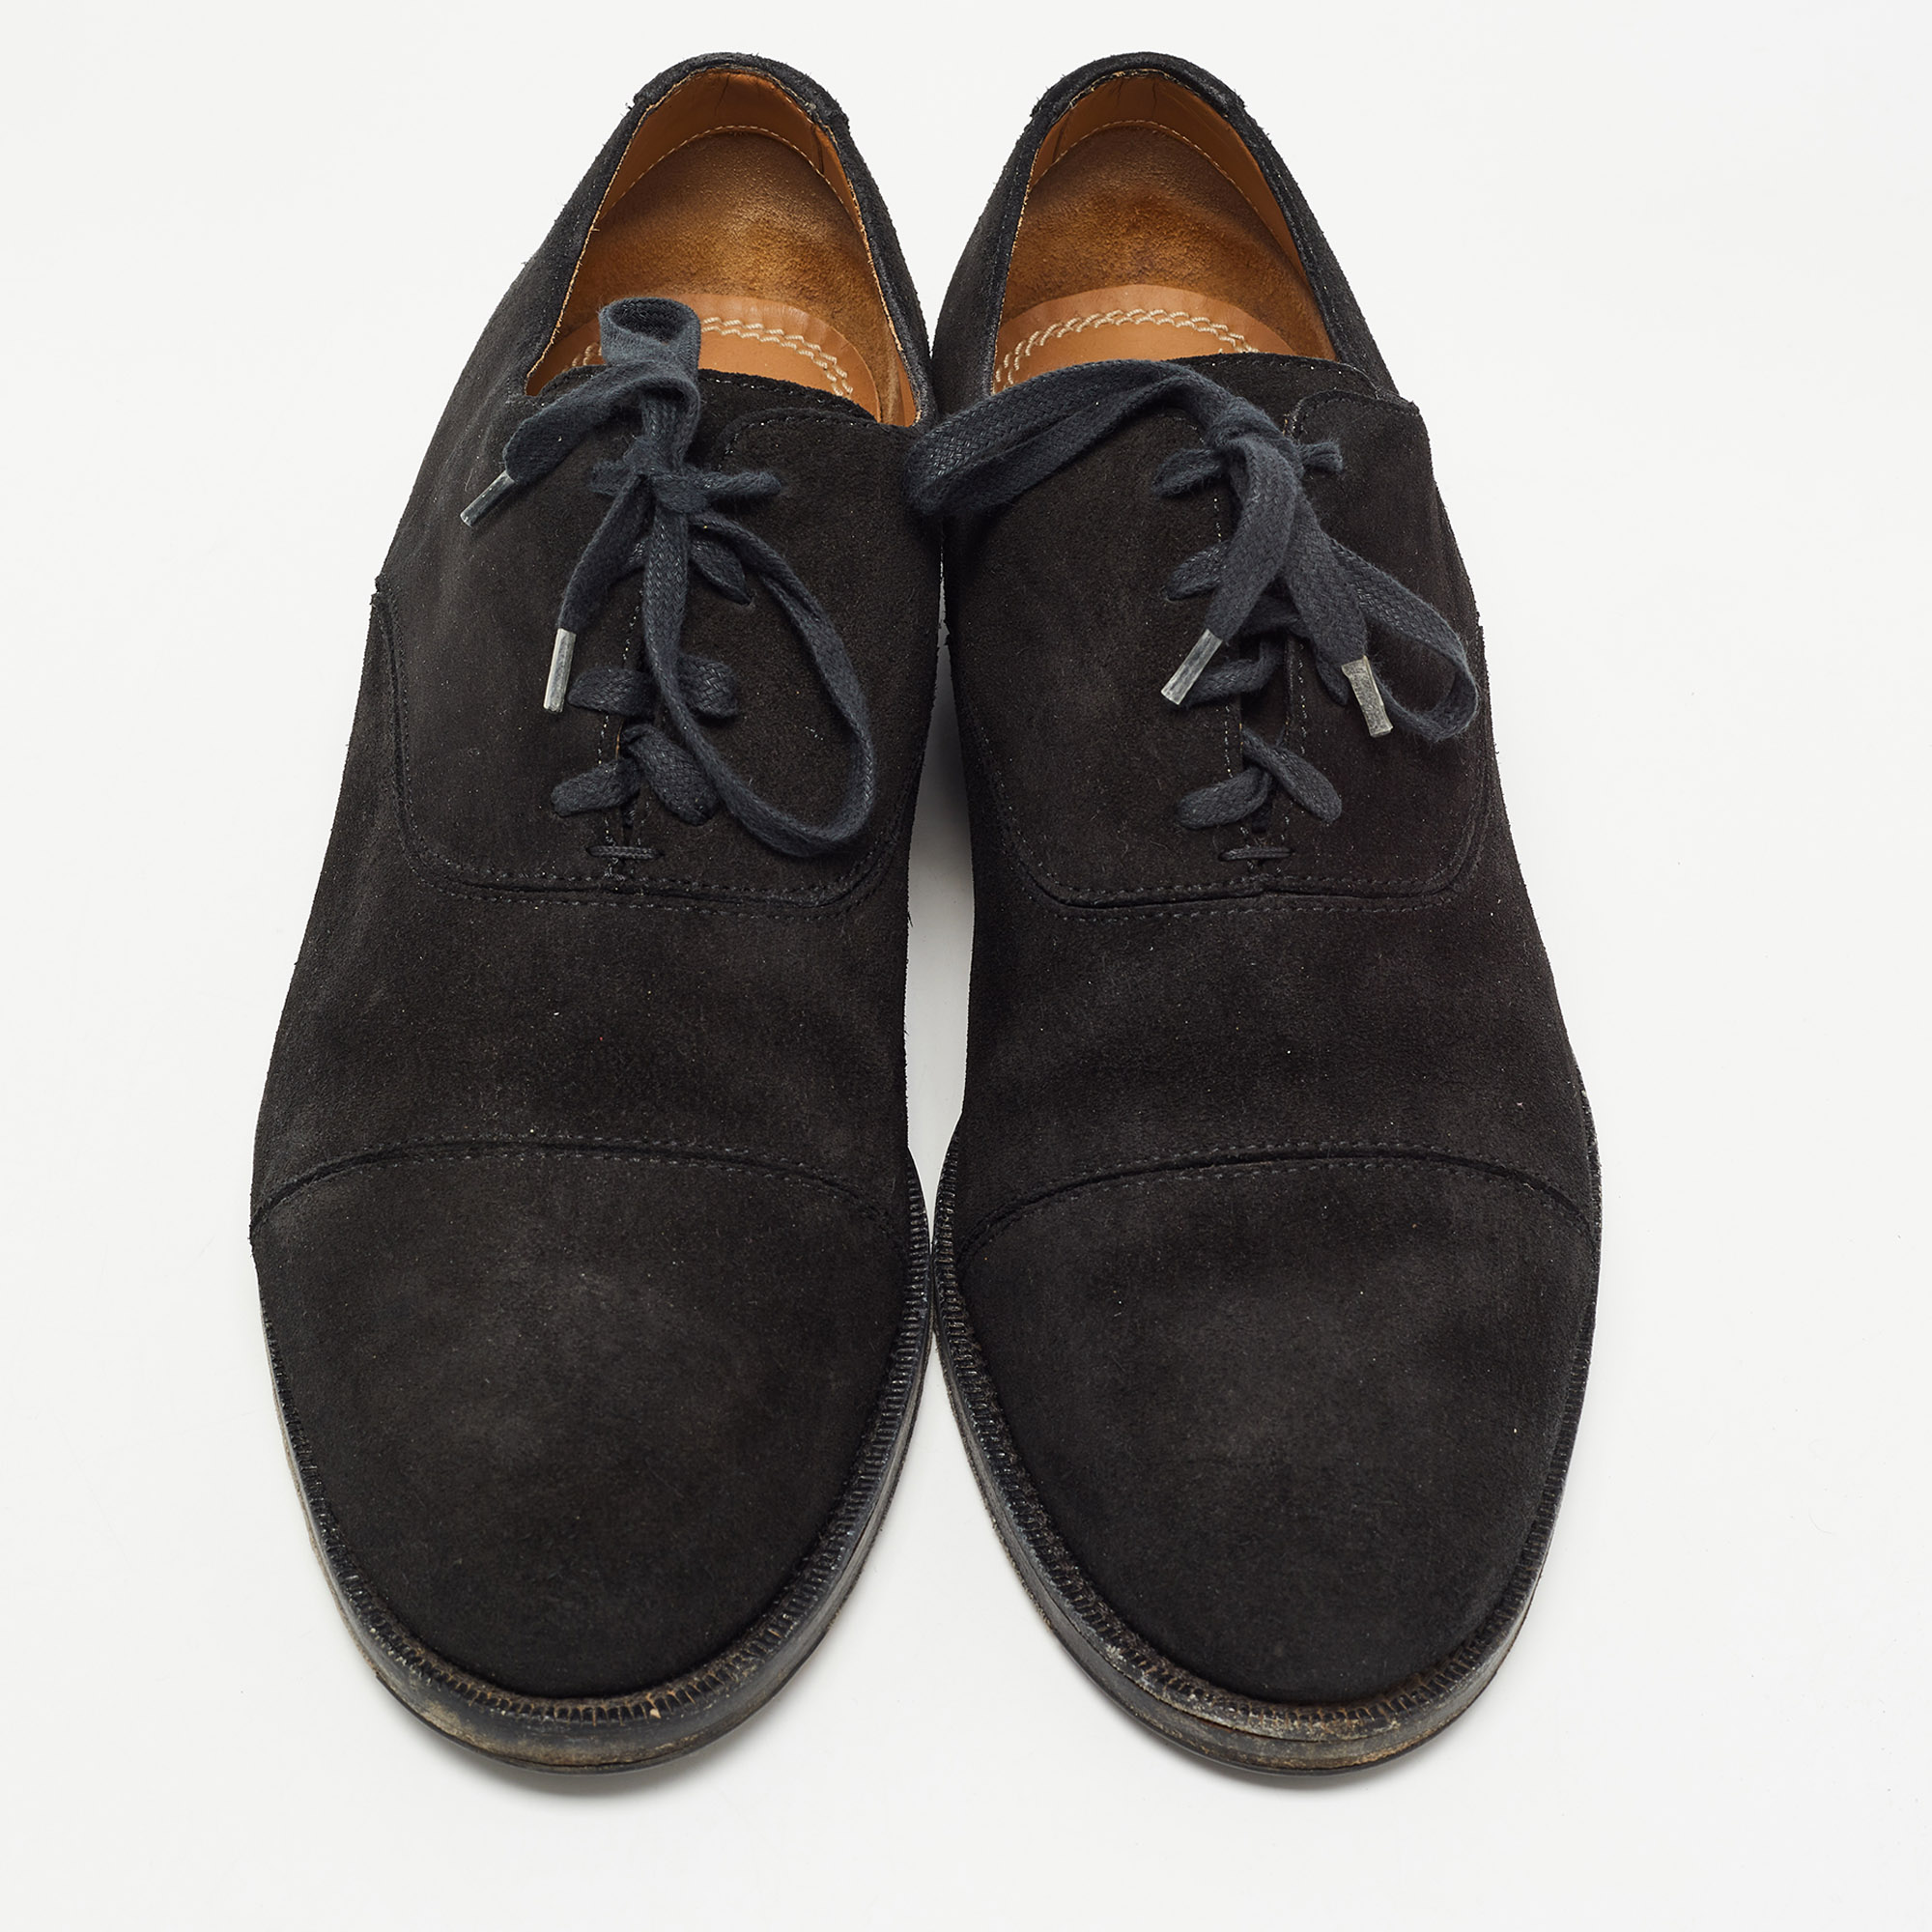 Jimmy Choo Black Suede Lace Up Oxfords Size 45